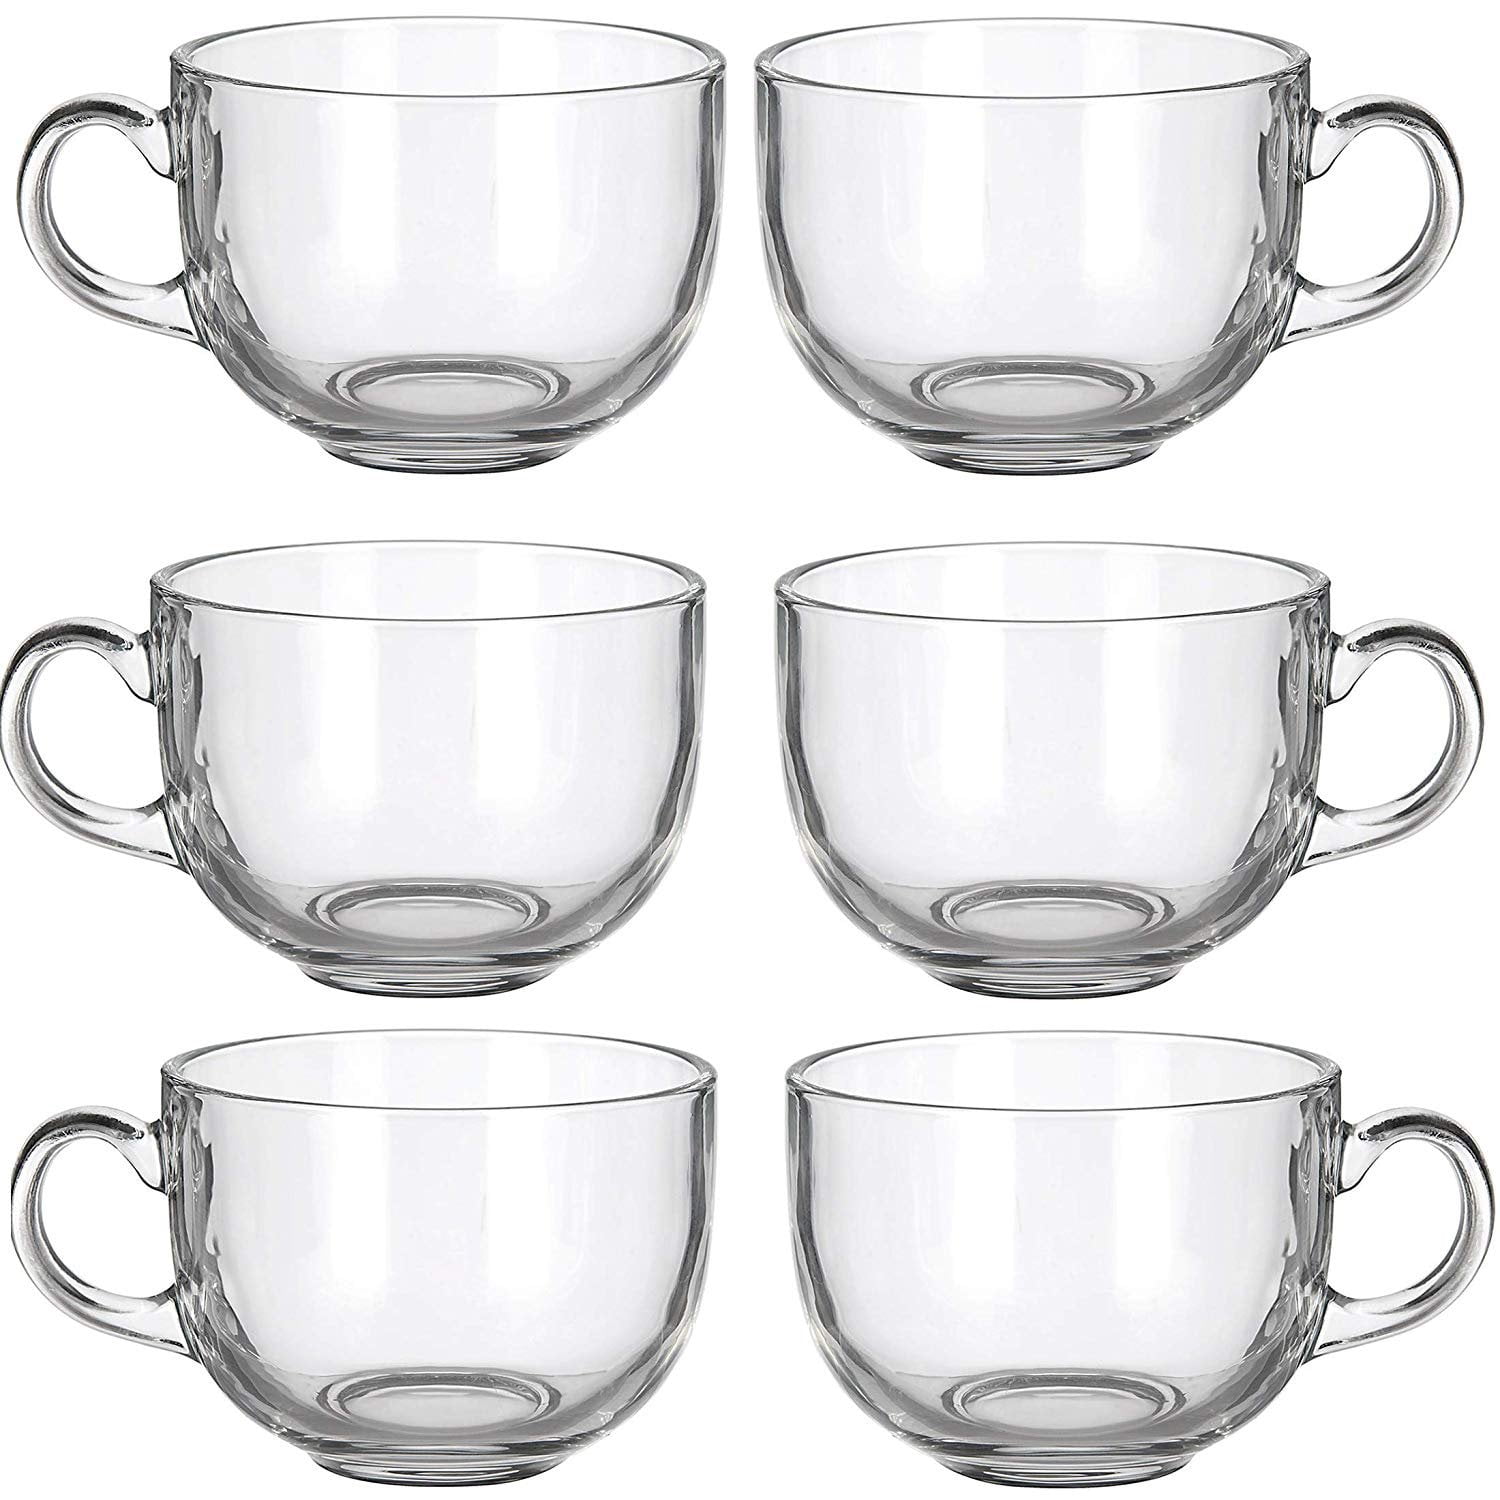 Vivimee Large Glass Coffee Mugs, Clear, Set of 6, 15 oz with Handles for Hot Beverages, Clear Mugs for Tea, Cappuccino, Latte